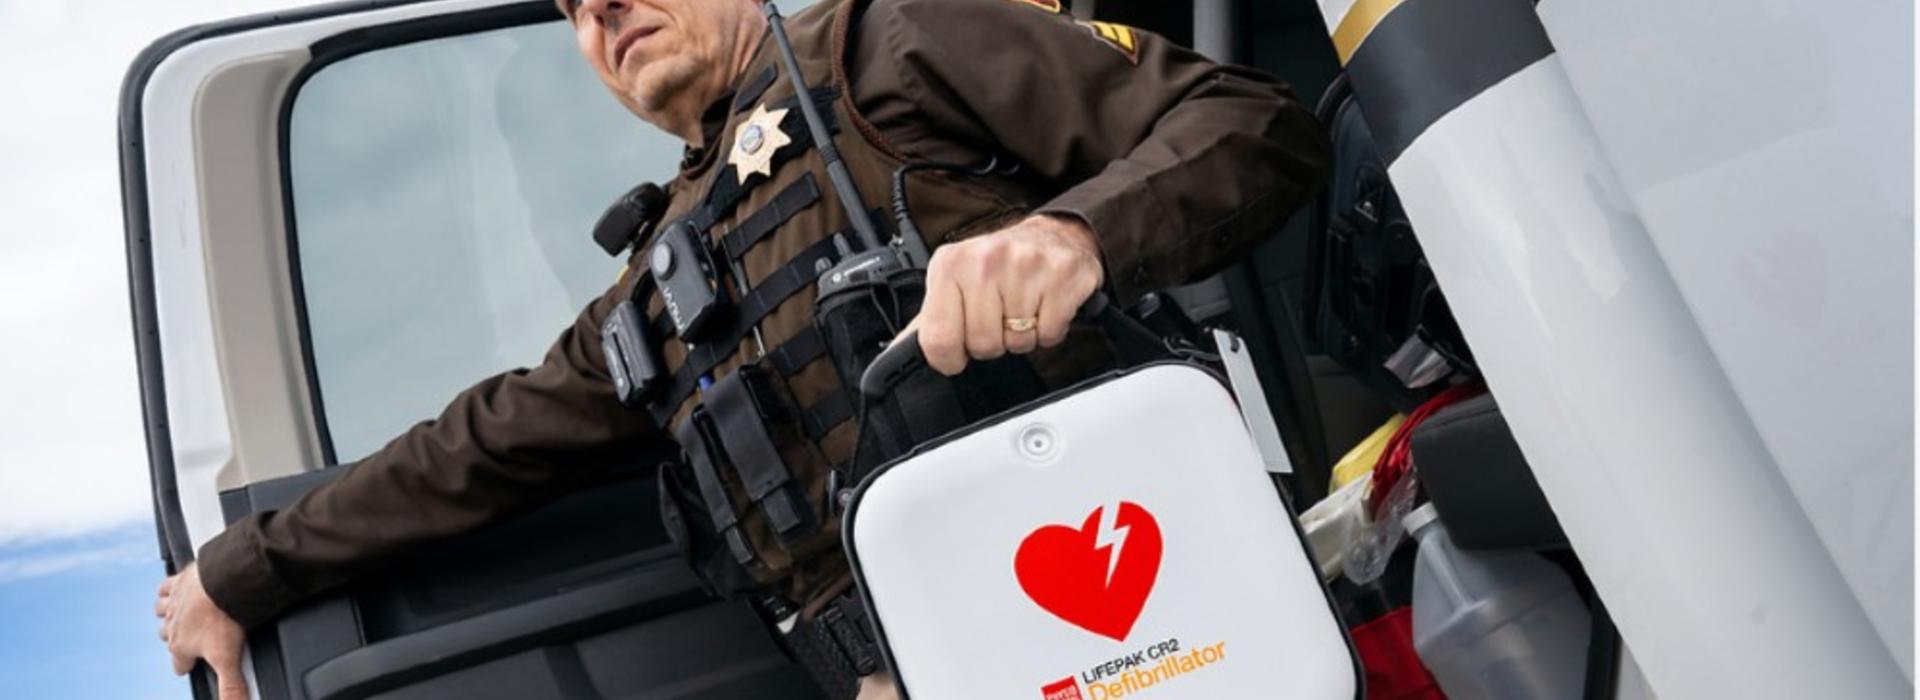 Officer with AED